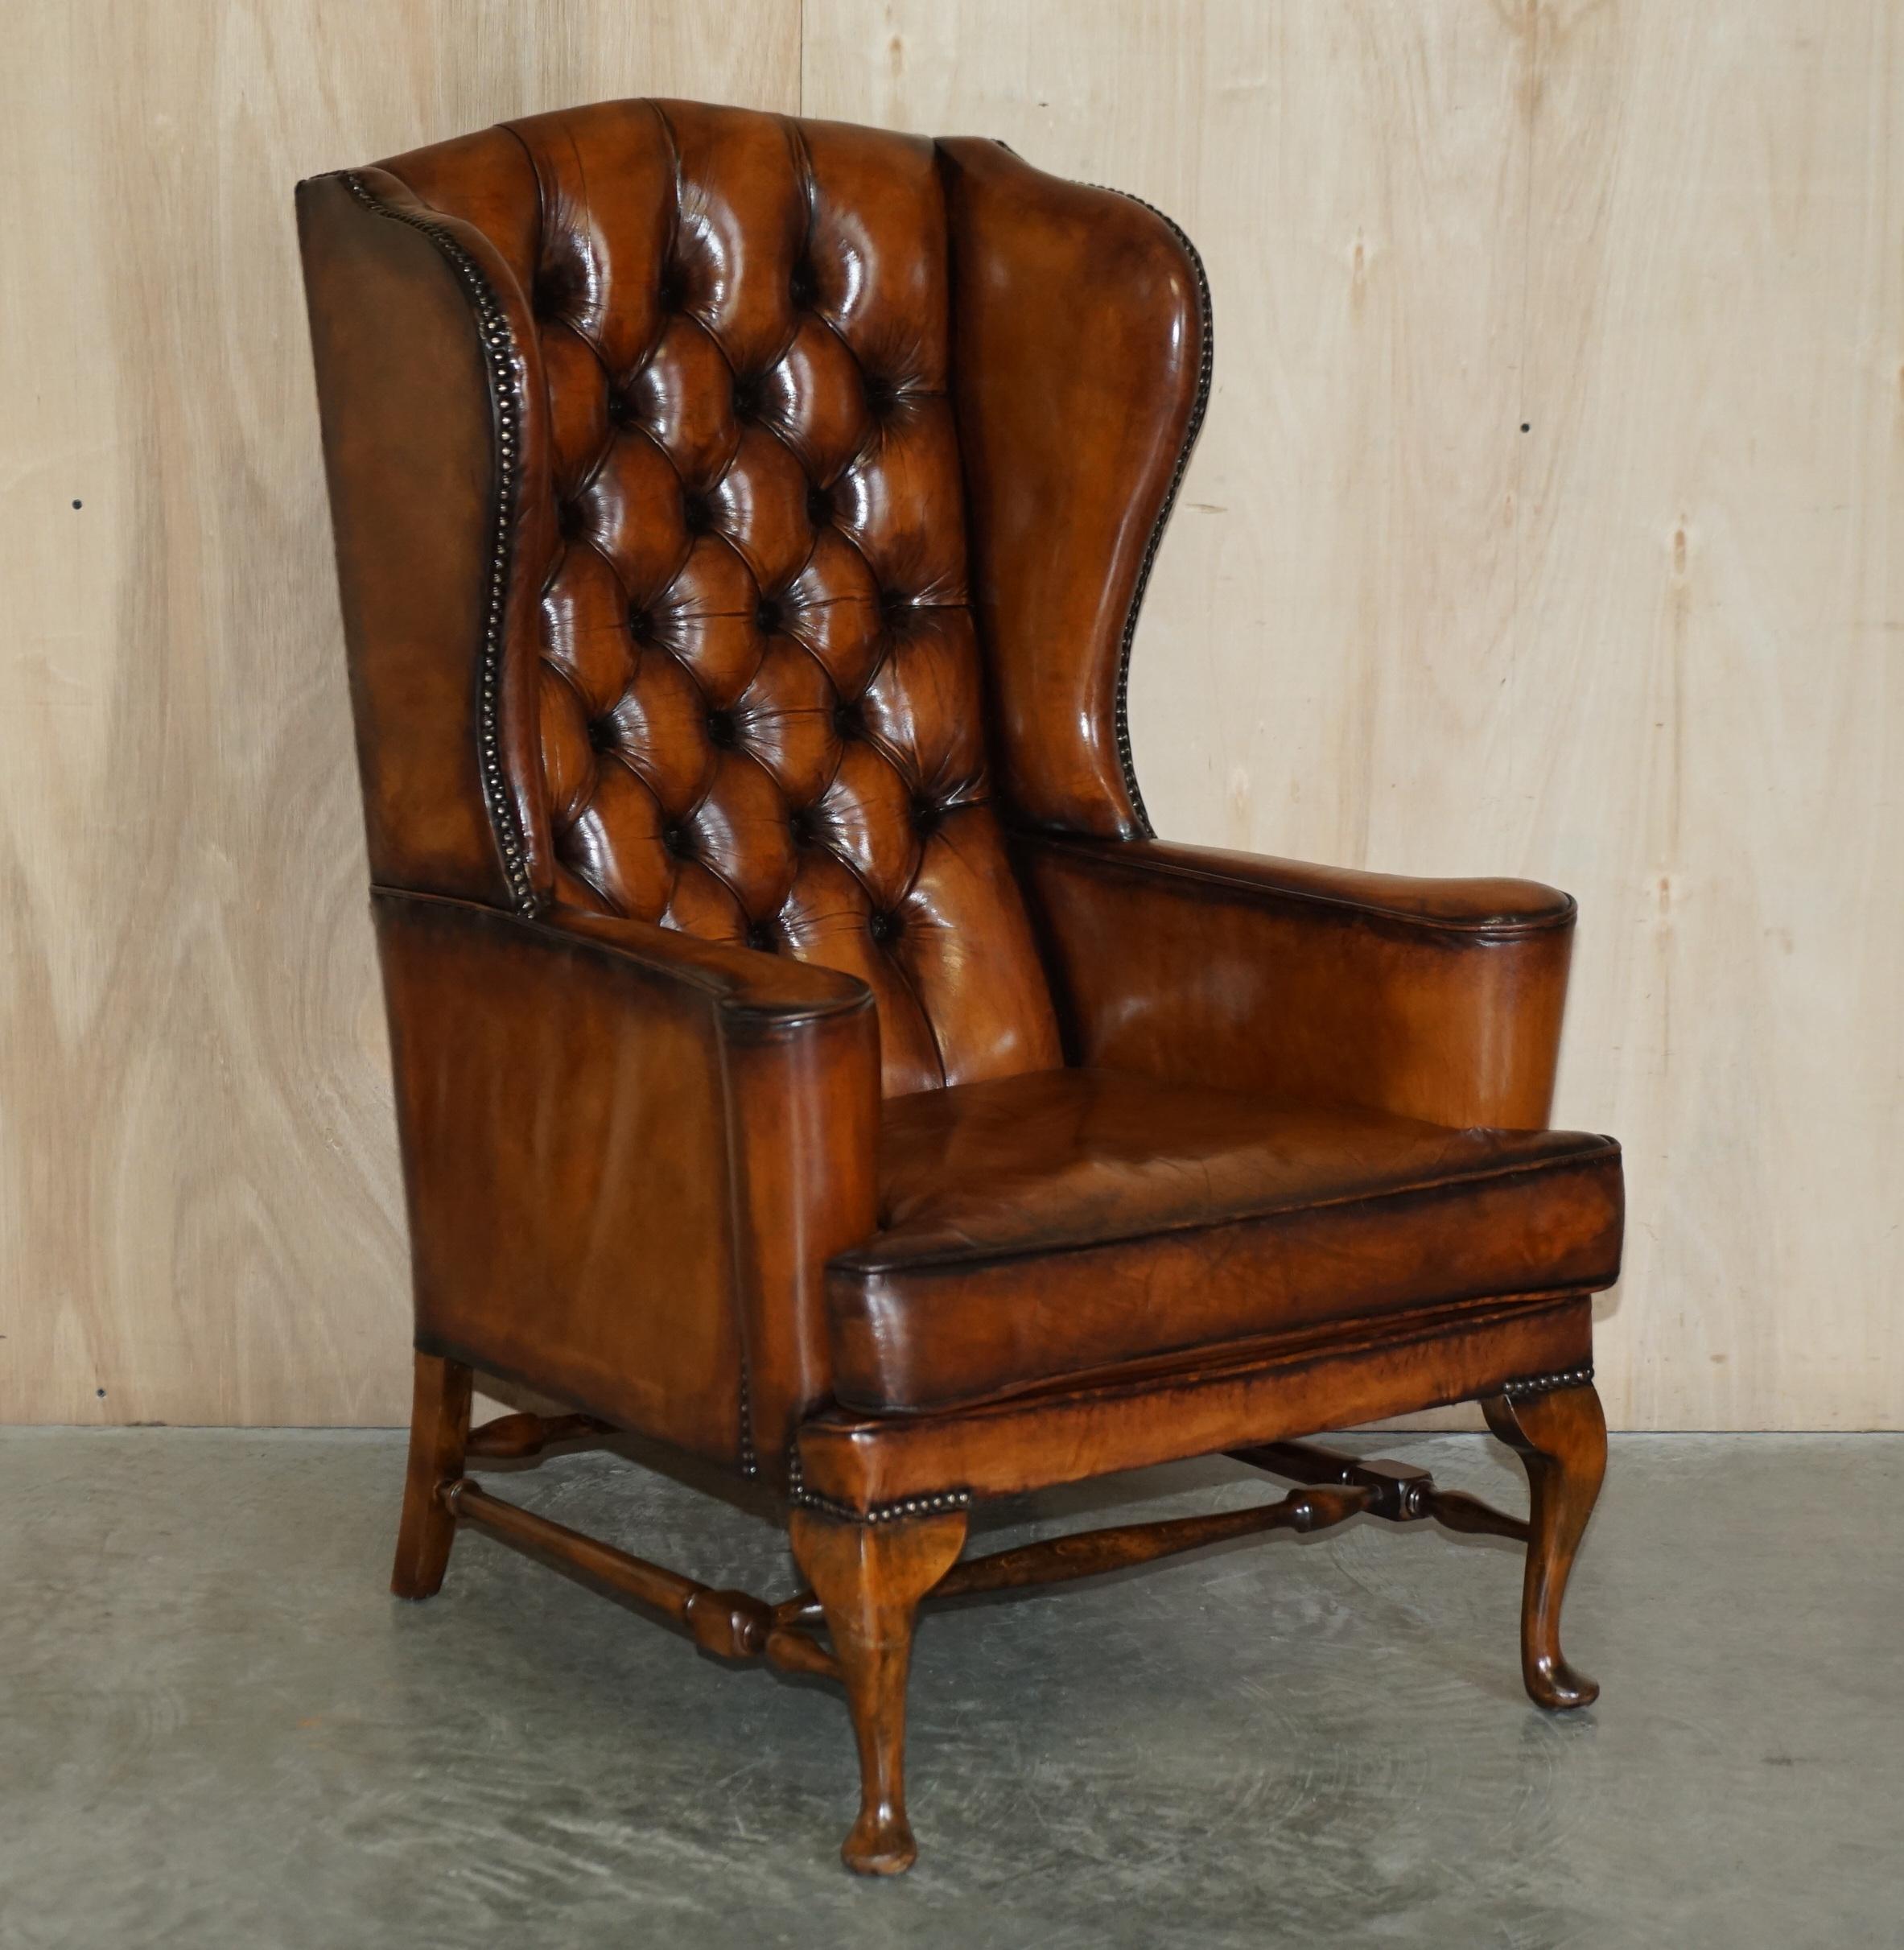 Royal House Antiques

Royal House Antiques is delighted to offer for sale this stunning pair of William Morris style fully restored vintage wingback armchairs in Whisky brown leather

Please note the delivery fee listed is just a guide, it covers